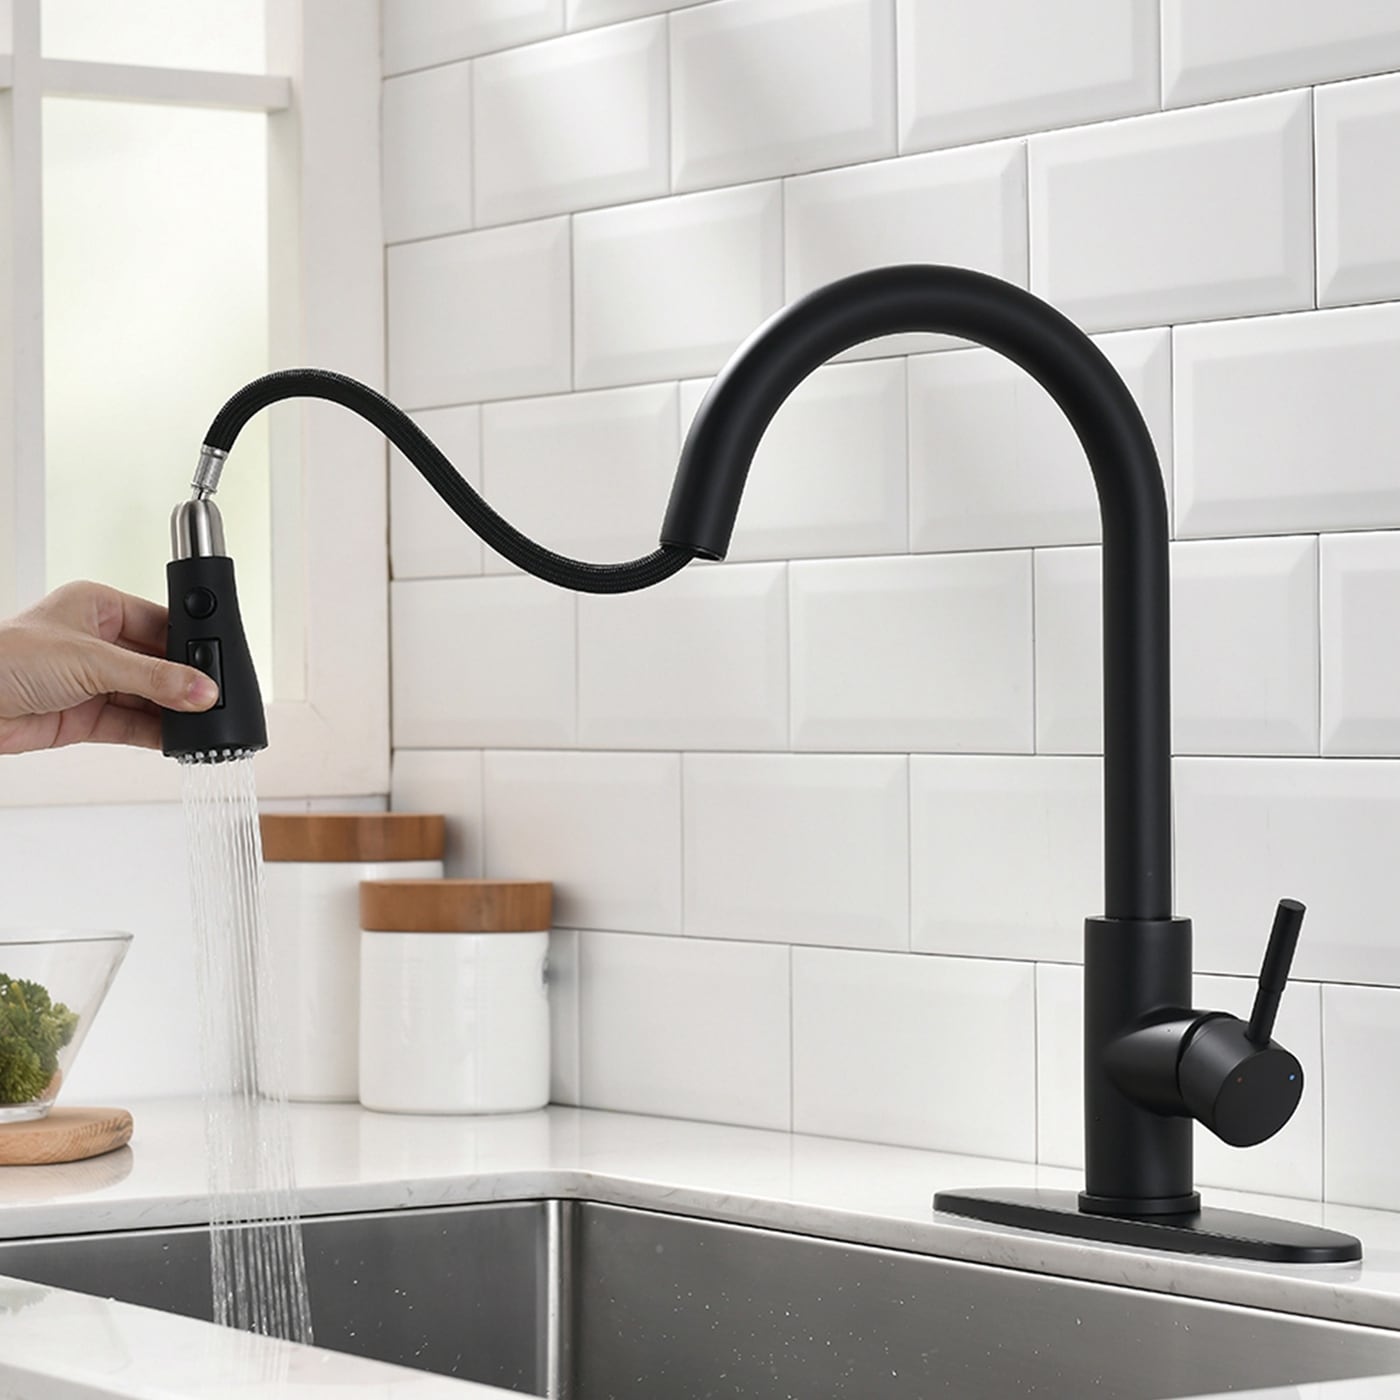 Single-Handle Pull Down Touch Kitchen Faucet with Deck Plate On Sale  Bed Bath  Beyond 36795845